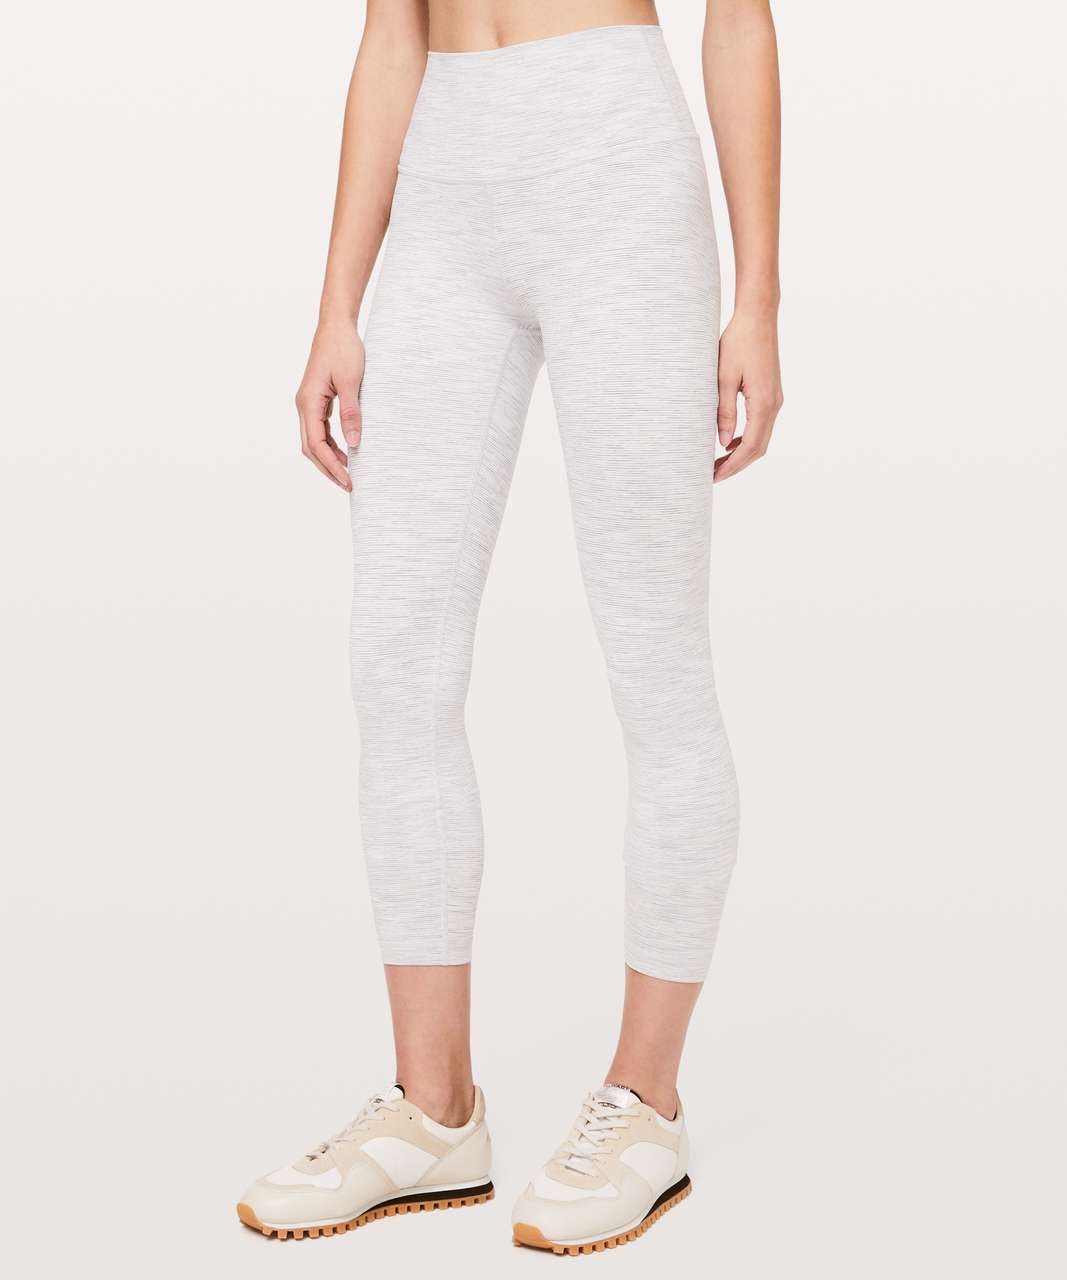 Lululemon Wunder Under High-Rise 7/8 Tight *Luxtreme 25" - Wee Are From Space Nimbus Battleship